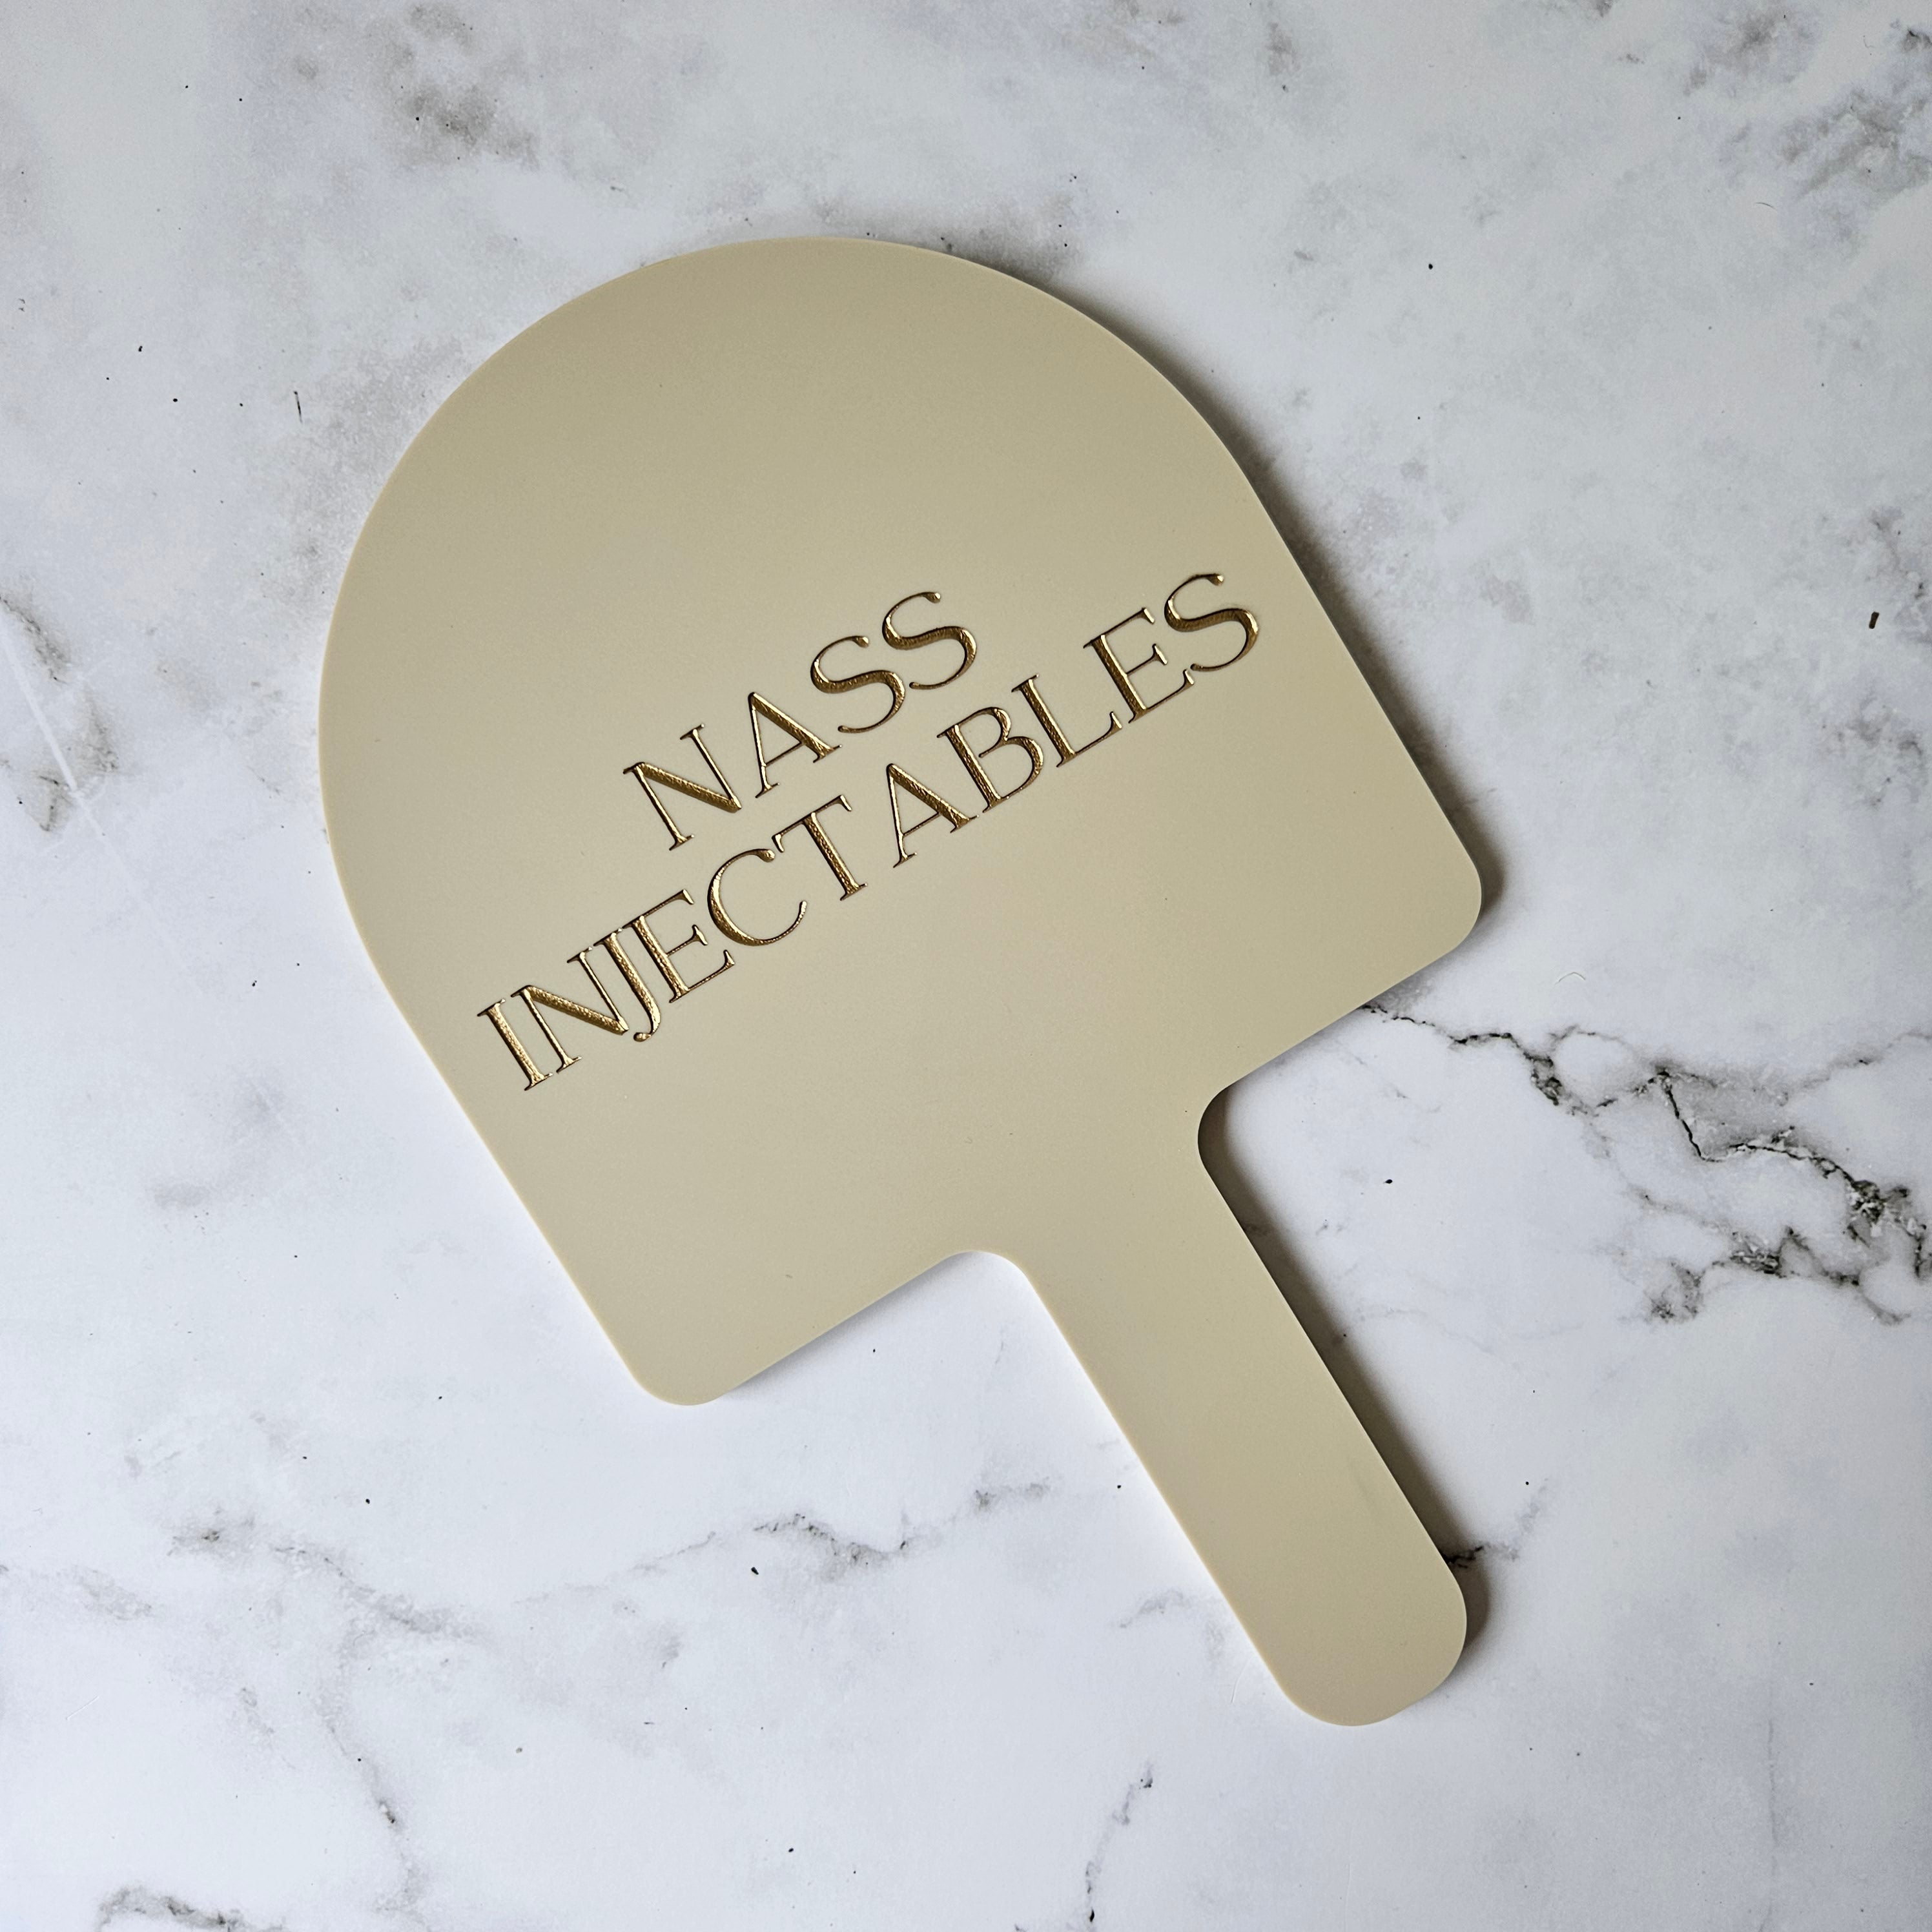 Custom Handheld Mirror with Logo for Injectable Clinic - Arch handheld mirror in Nude acrylic with Gold logo